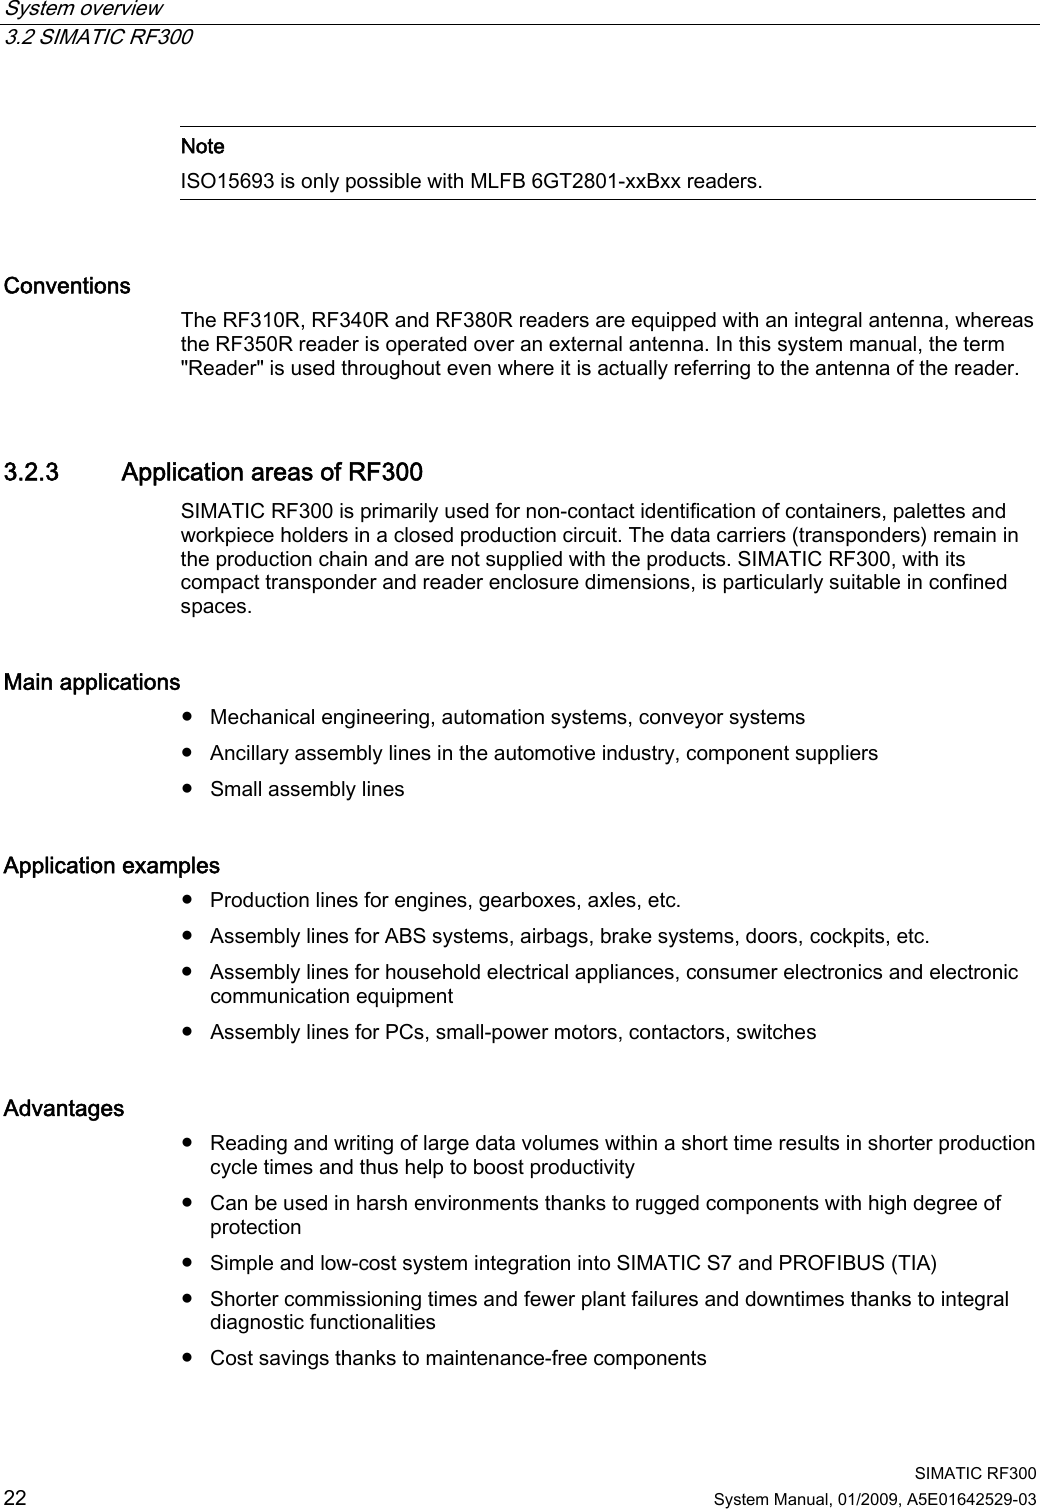 System overview   3.2 SIMATIC RF300  SIMATIC RF300 22 System Manual, 01/2009, A5E01642529-03   Note ISO15693 is only possible with MLFB 6GT2801-xxBxx readers.  Conventions   The RF310R, RF340R and RF380R readers are equipped with an integral antenna, whereas the RF350R reader is operated over an external antenna. In this system manual, the term &quot;Reader&quot; is used throughout even where it is actually referring to the antenna of the reader. 3.2.3 Application areas of RF300 SIMATIC RF300 is primarily used for non-contact identification of containers, palettes and workpiece holders in a closed production circuit. The data carriers (transponders) remain in the production chain and are not supplied with the products. SIMATIC RF300, with its compact transponder and reader enclosure dimensions, is particularly suitable in confined spaces.   Main applications   ● Mechanical engineering, automation systems, conveyor systems ● Ancillary assembly lines in the automotive industry, component suppliers ● Small assembly lines Application examples ● Production lines for engines, gearboxes, axles, etc. ● Assembly lines for ABS systems, airbags, brake systems, doors, cockpits, etc. ● Assembly lines for household electrical appliances, consumer electronics and electronic communication equipment ● Assembly lines for PCs, small-power motors, contactors, switches Advantages   ● Reading and writing of large data volumes within a short time results in shorter production cycle times and thus help to boost productivity ● Can be used in harsh environments thanks to rugged components with high degree of protection ● Simple and low-cost system integration into SIMATIC S7 and PROFIBUS (TIA) ● Shorter commissioning times and fewer plant failures and downtimes thanks to integral diagnostic functionalities ● Cost savings thanks to maintenance-free components 